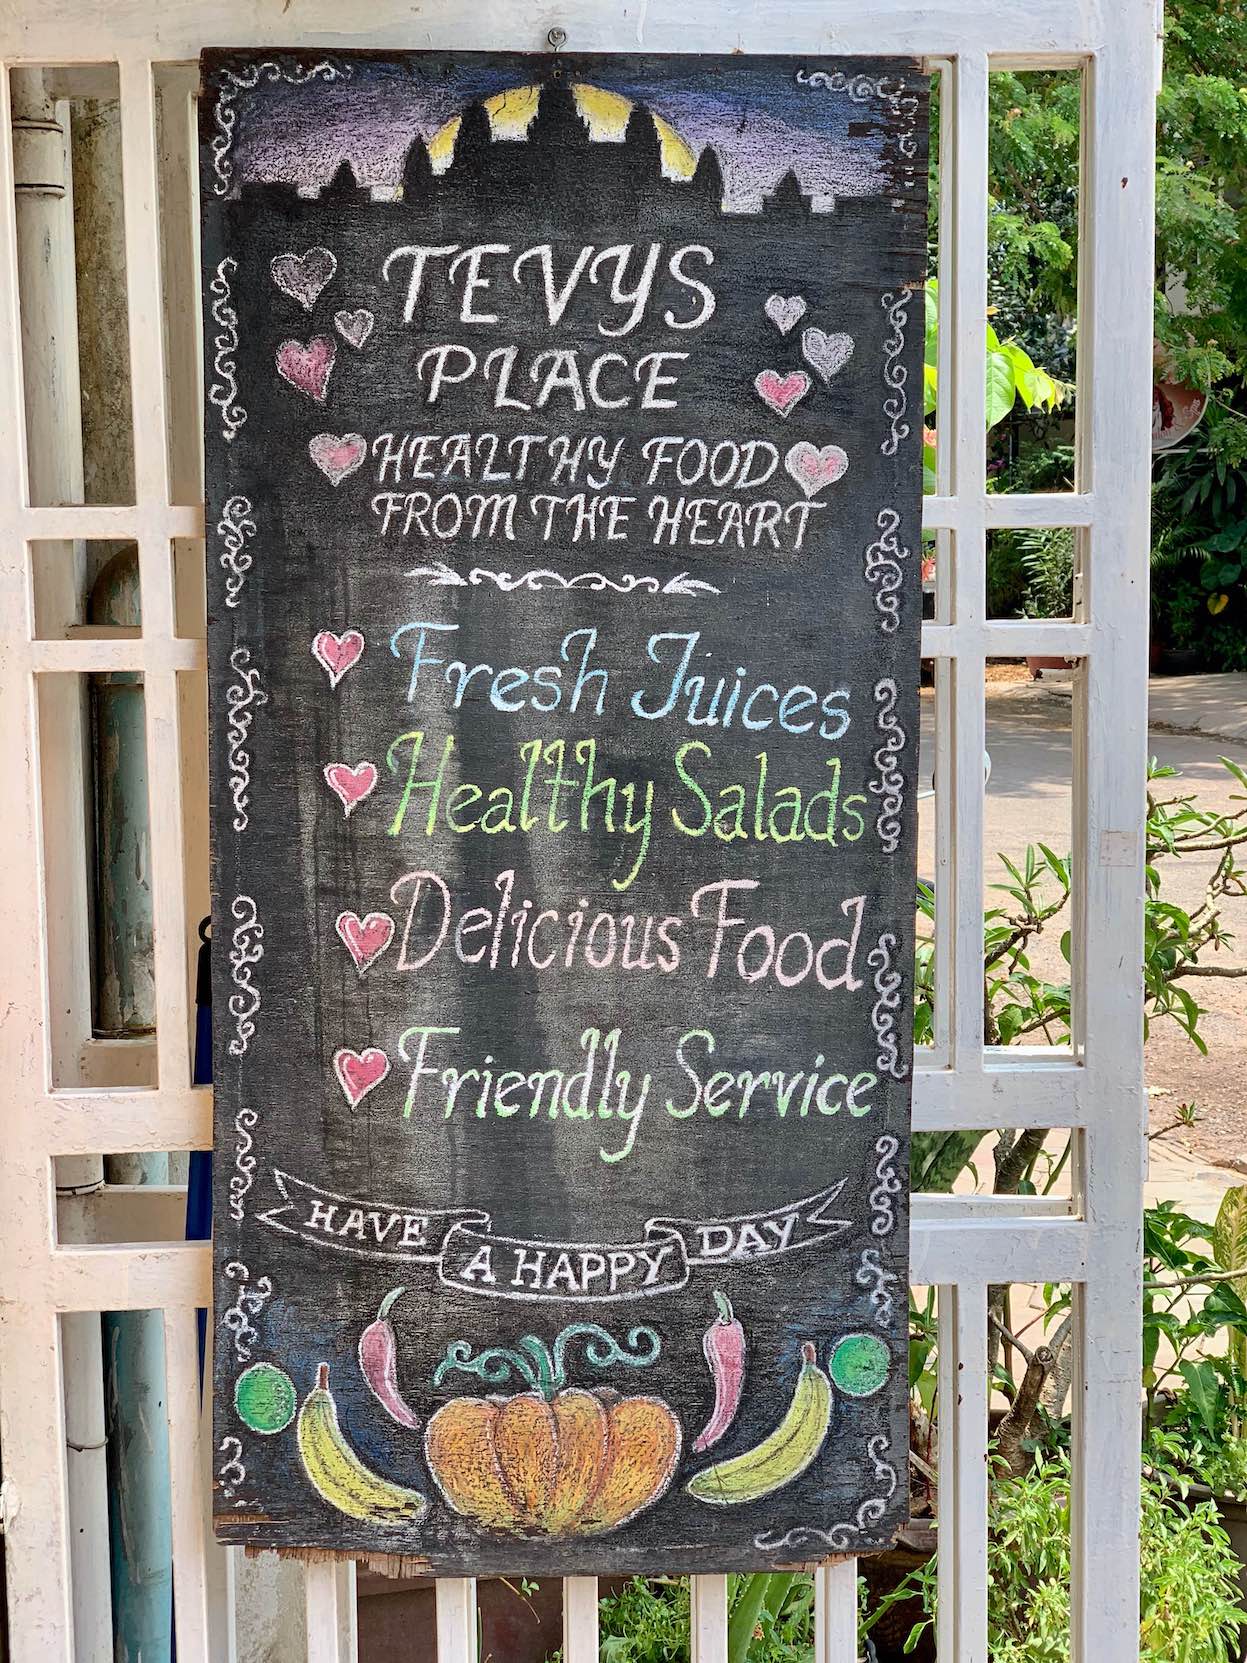 Tevy's Place healthy food from the heart